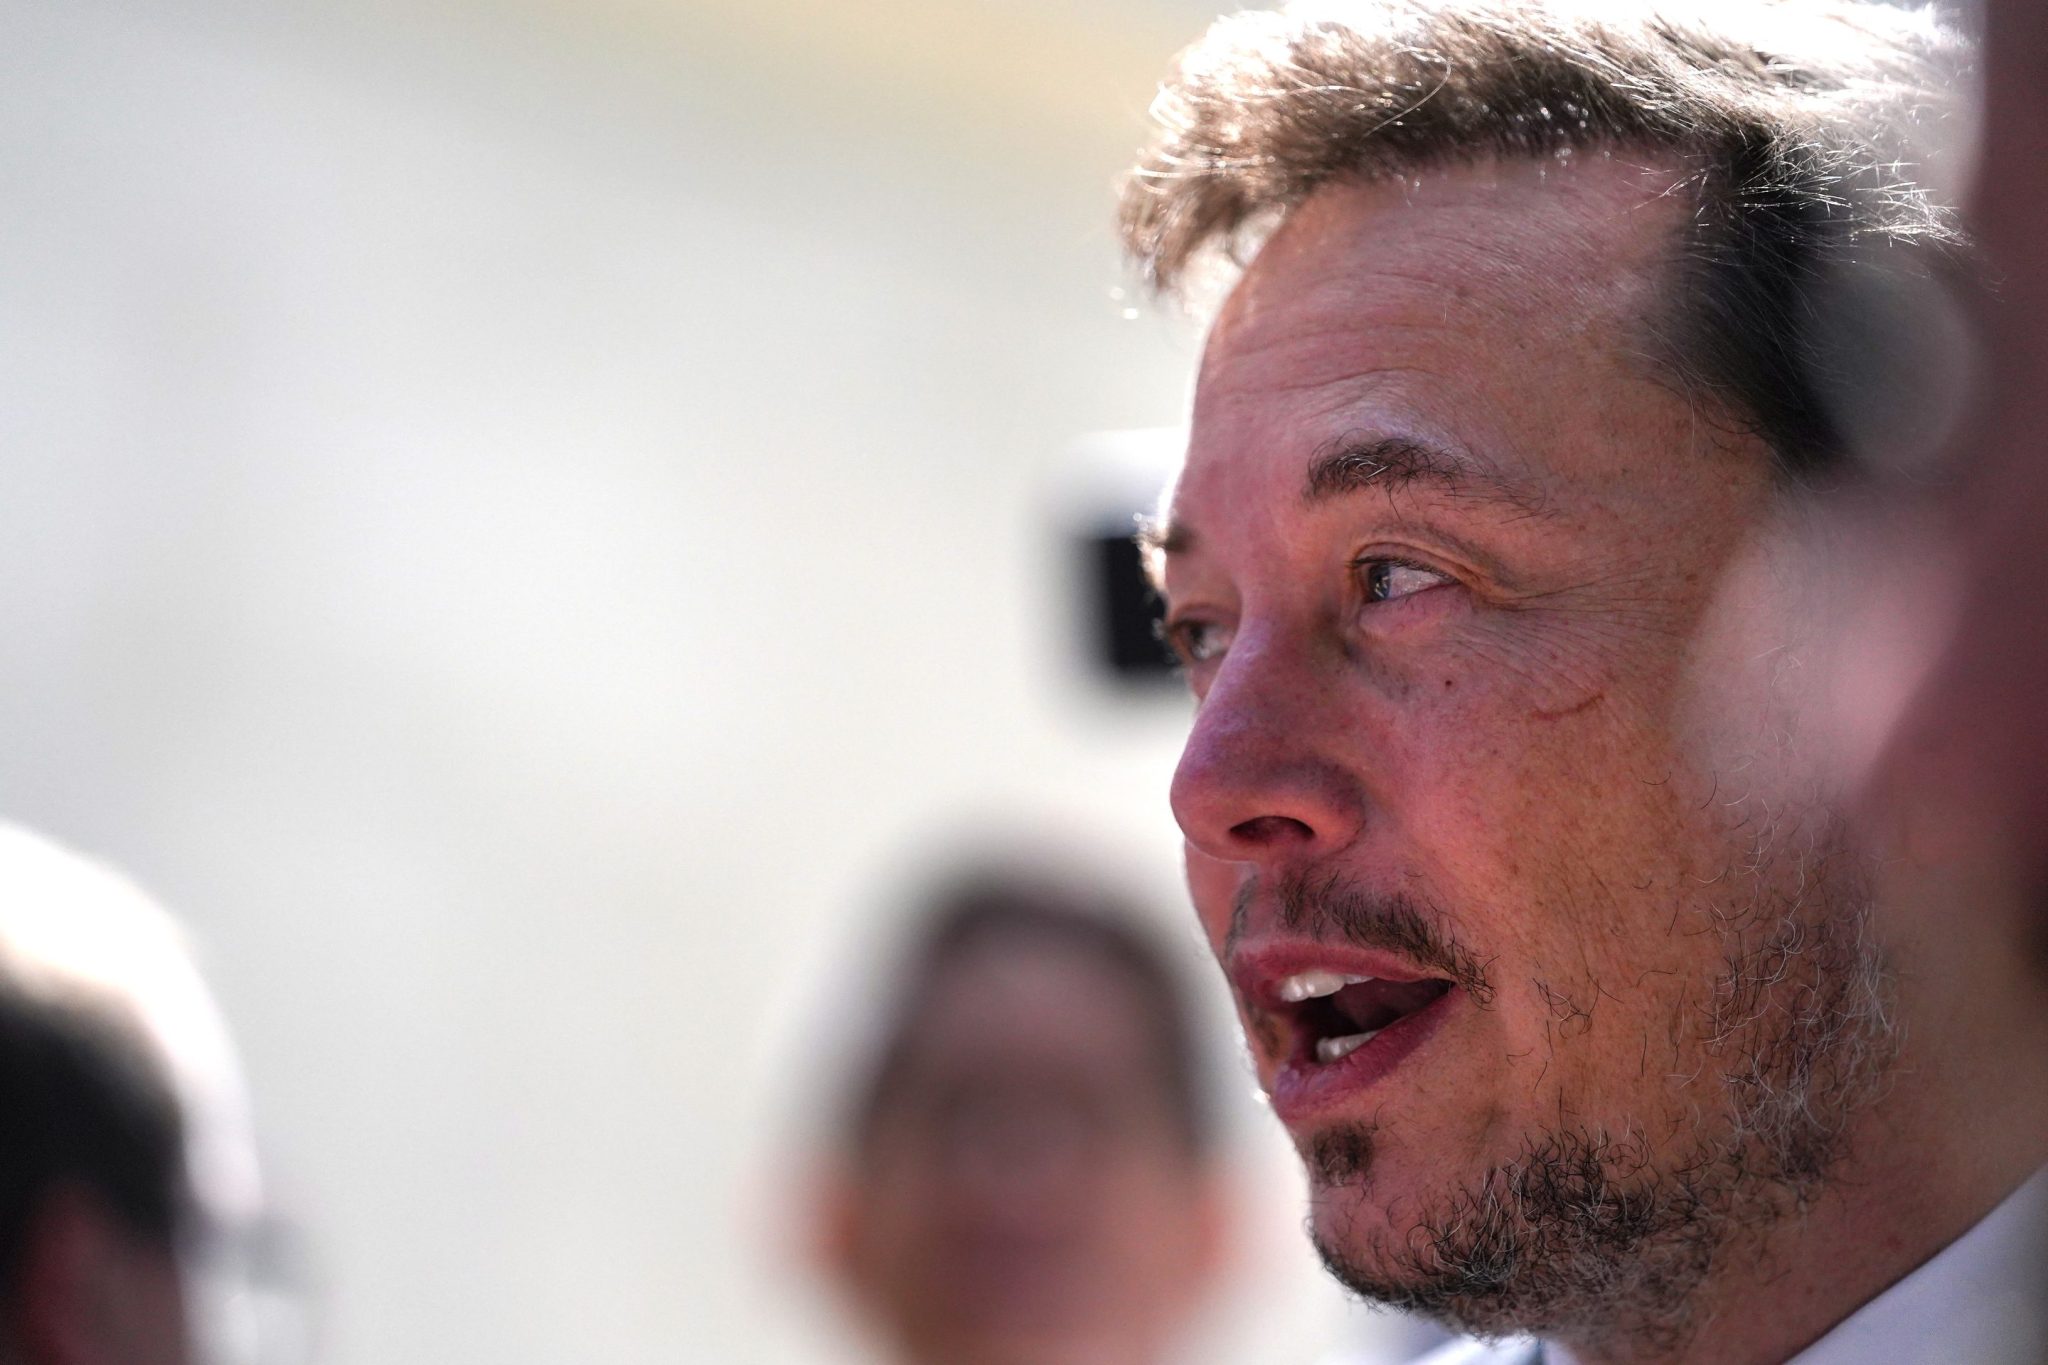 Elon Musk says ‘sorry to see what’s happening in Israel’ after Hamas attacks